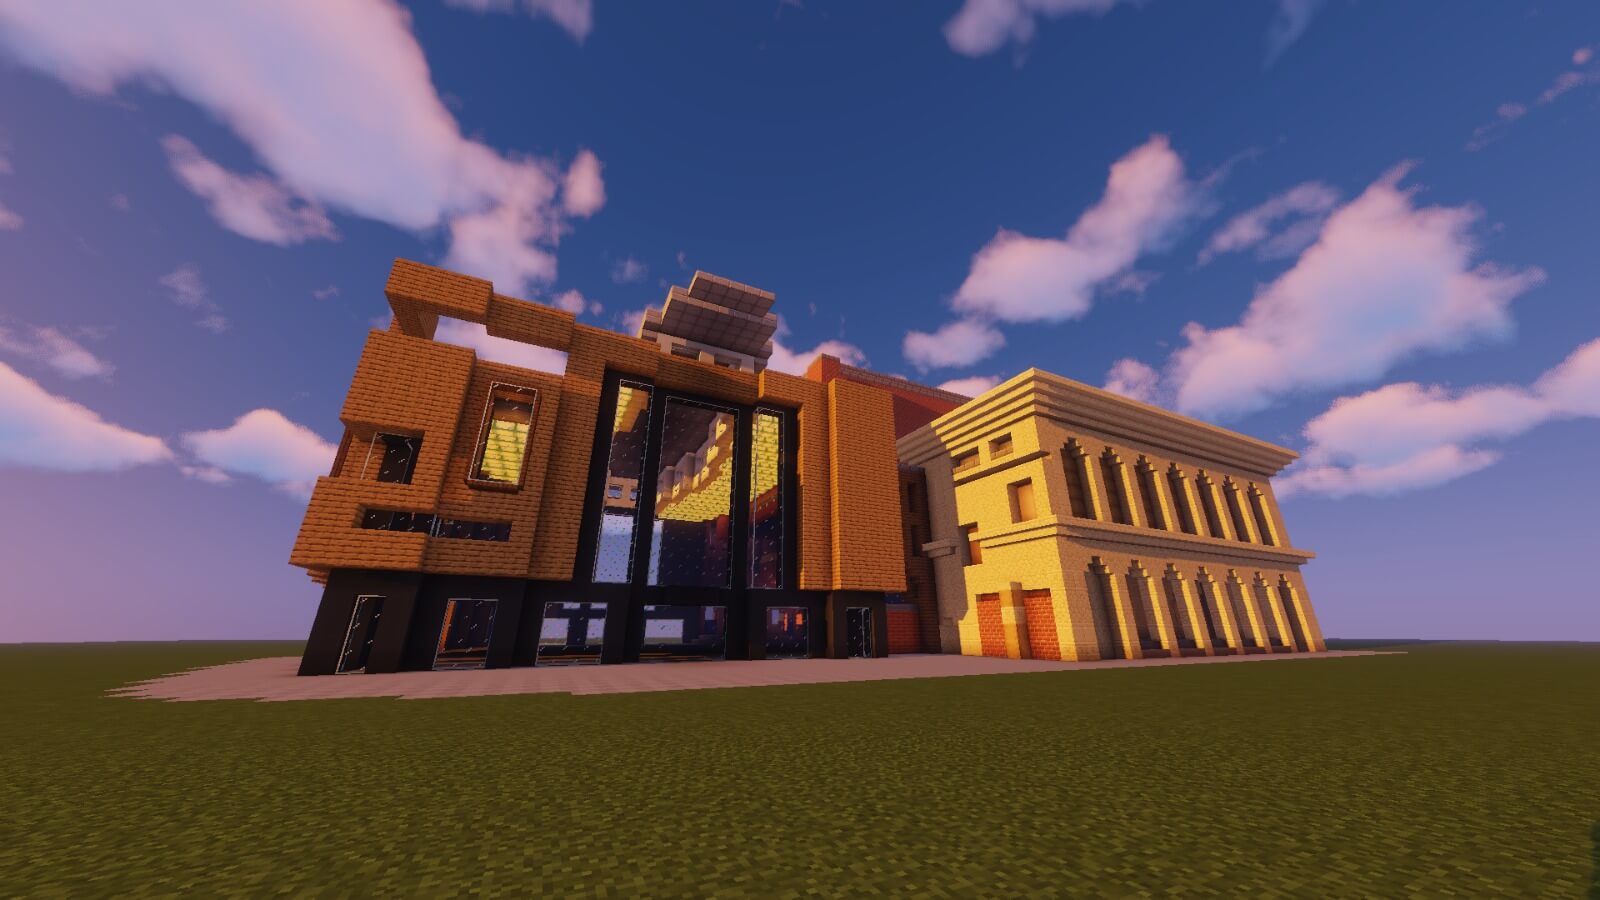 Exterior view of the Minecraft Colston Hall